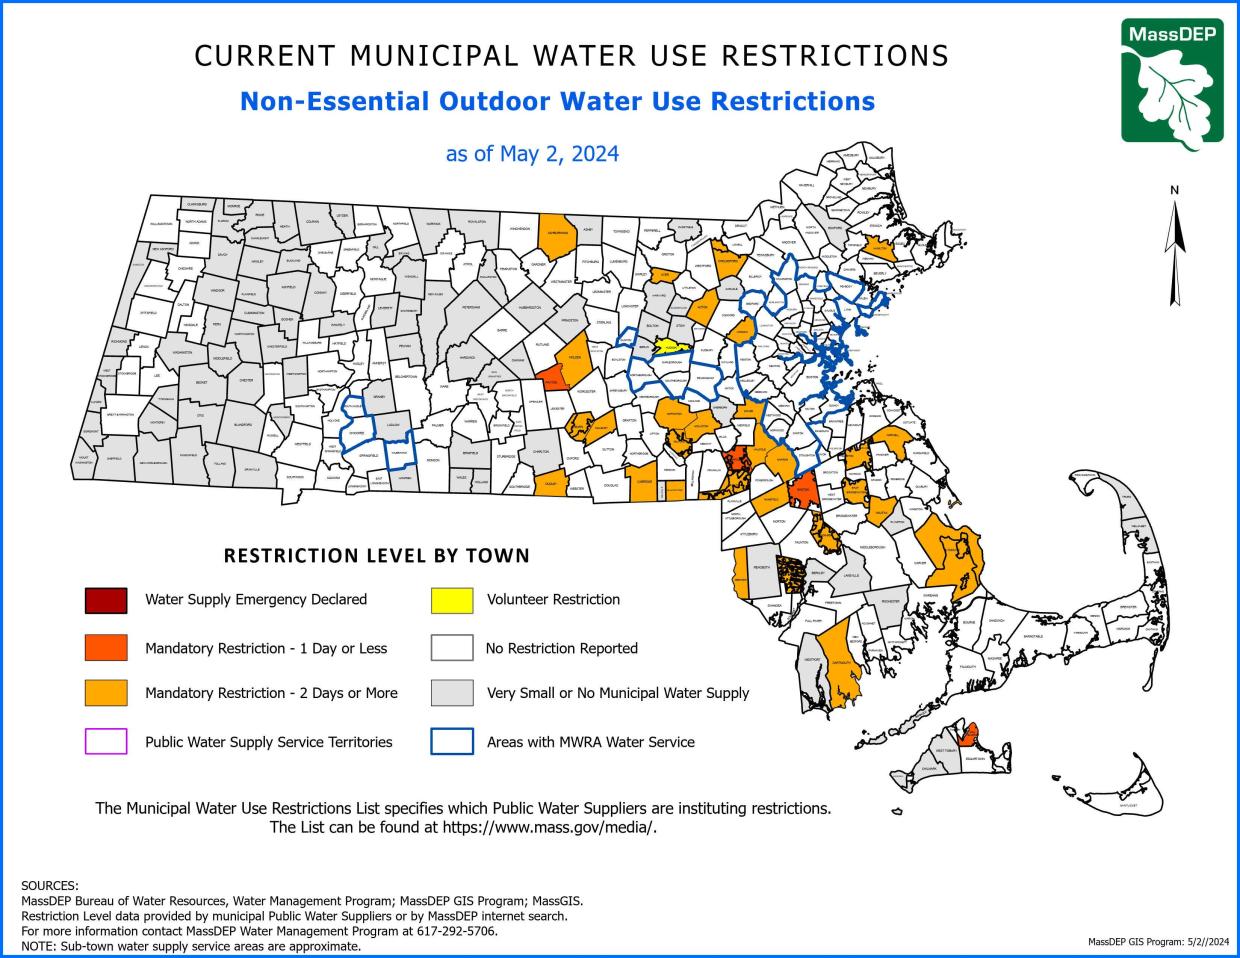 Non-Essential Outdoor Water Use Restrictions